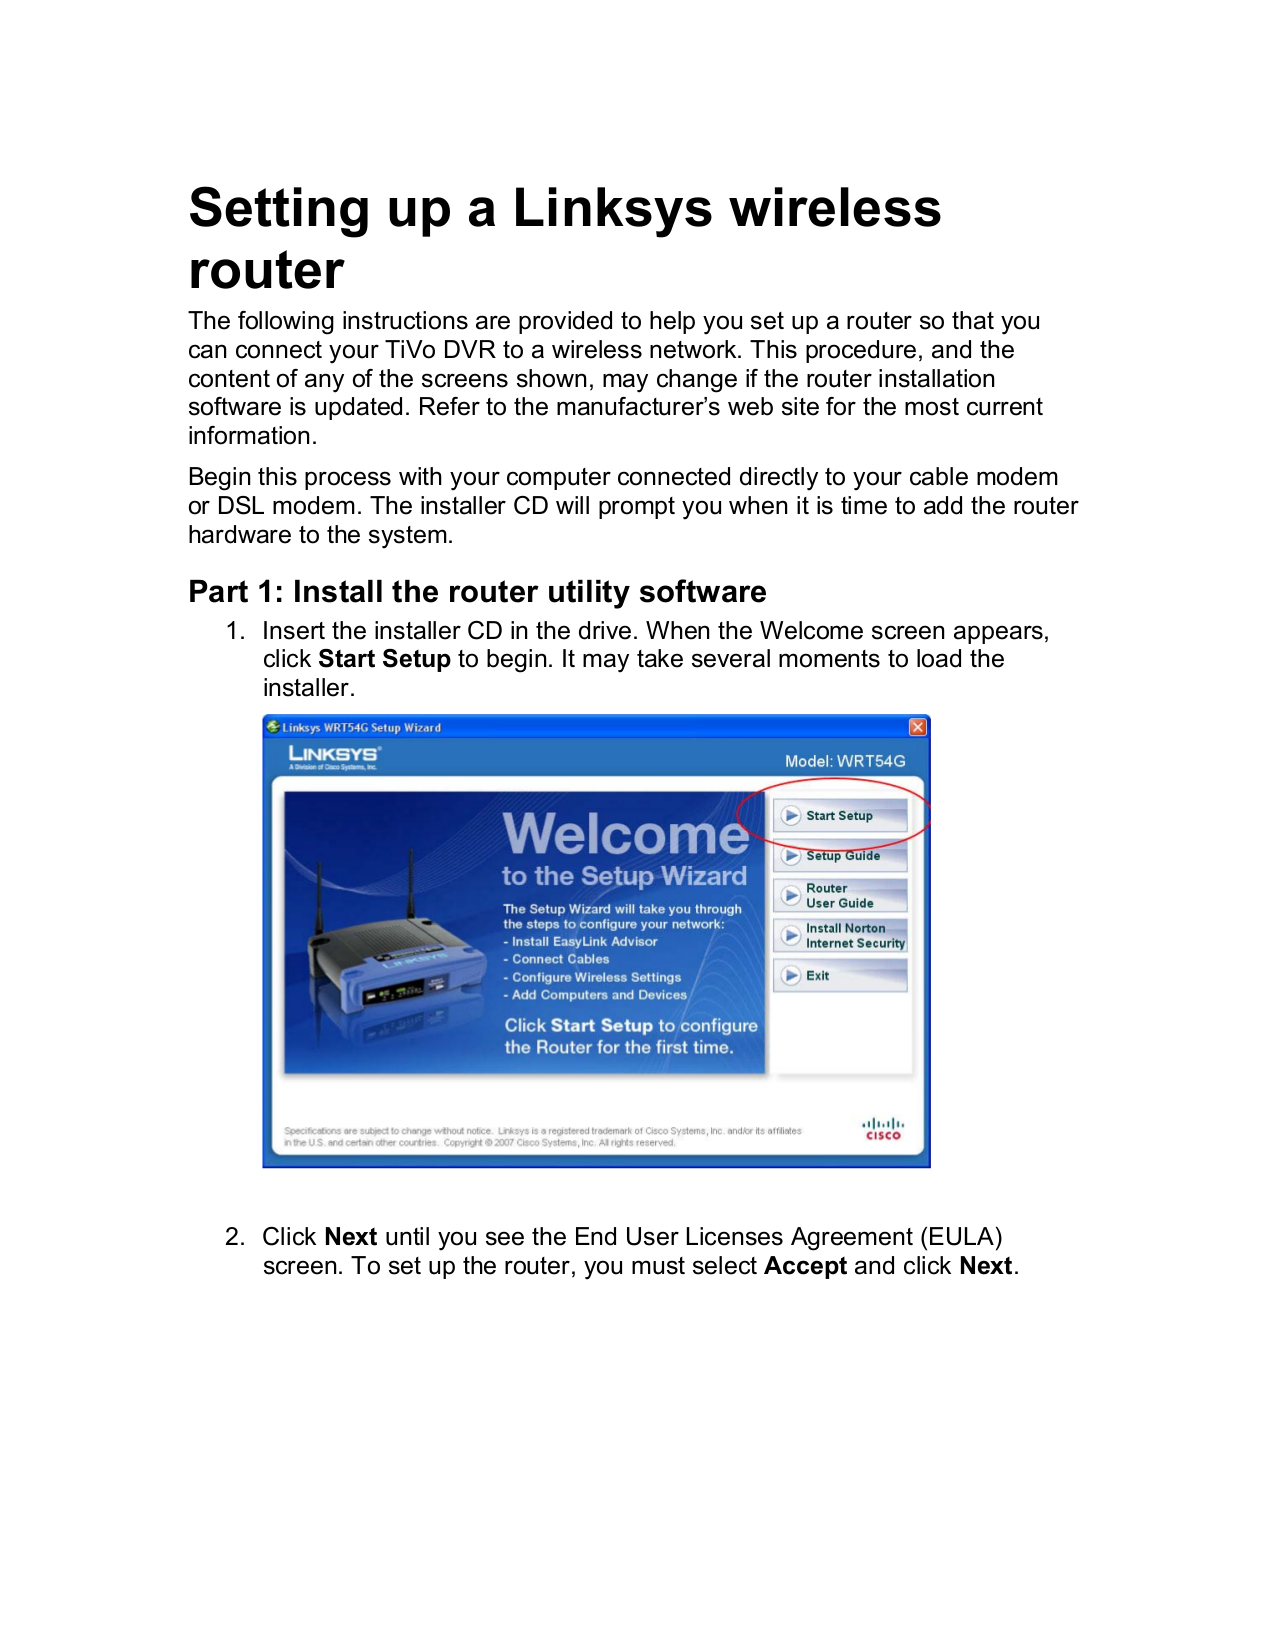 pdf for Linksys Wireless Router E2500 manual click to preview